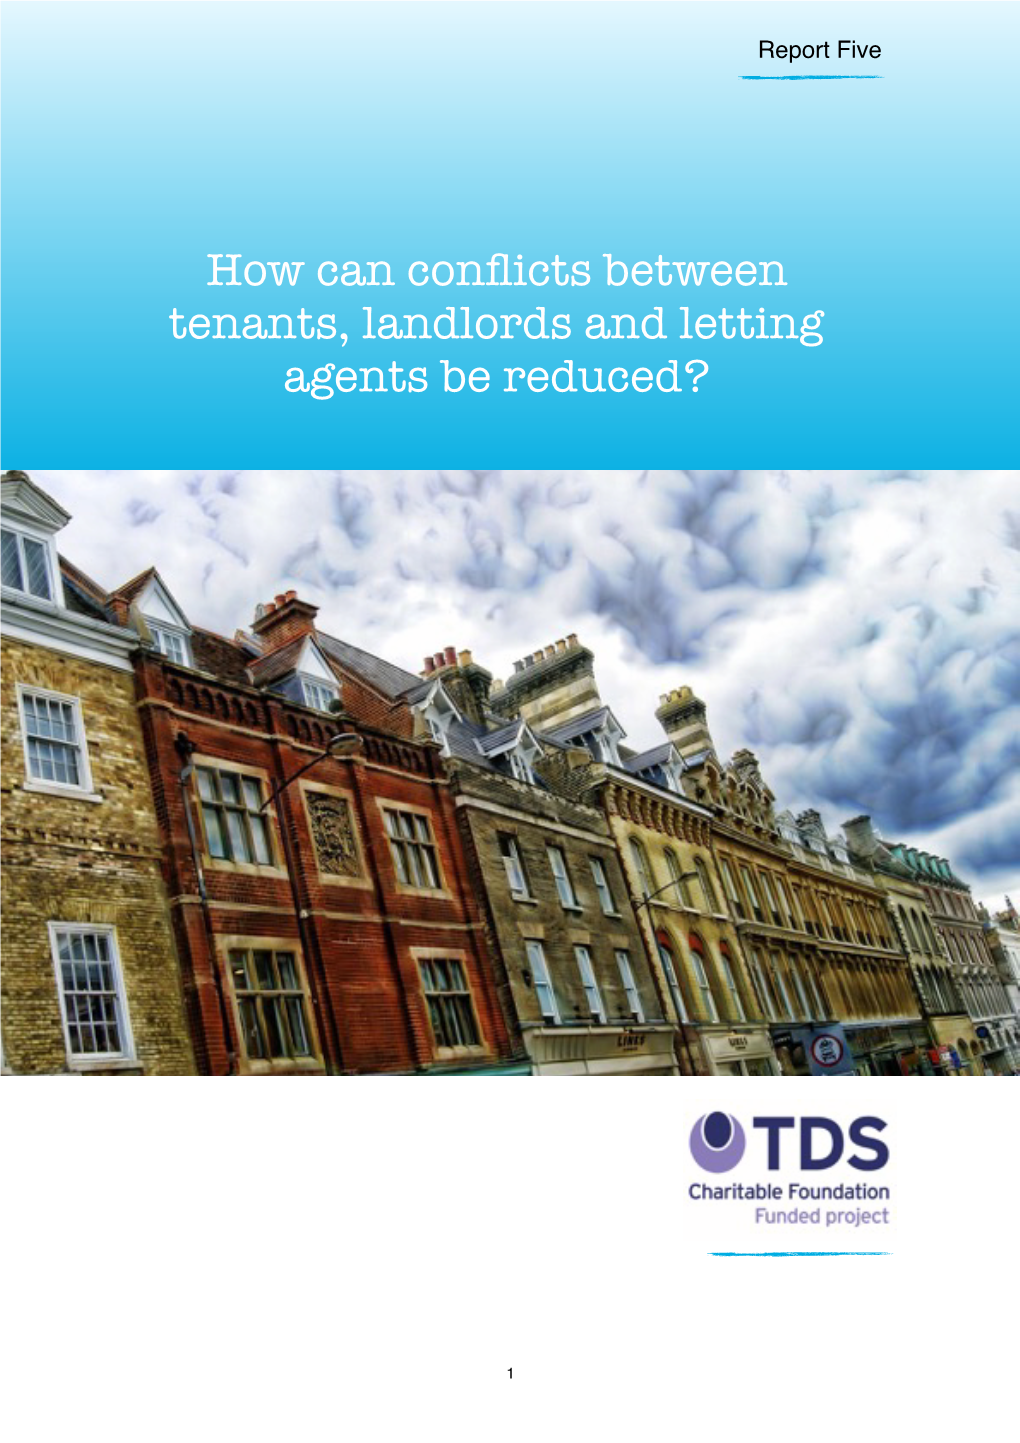 How Can Conflicts Between Tenants, Landlords and Letting Agents Be Reduced?